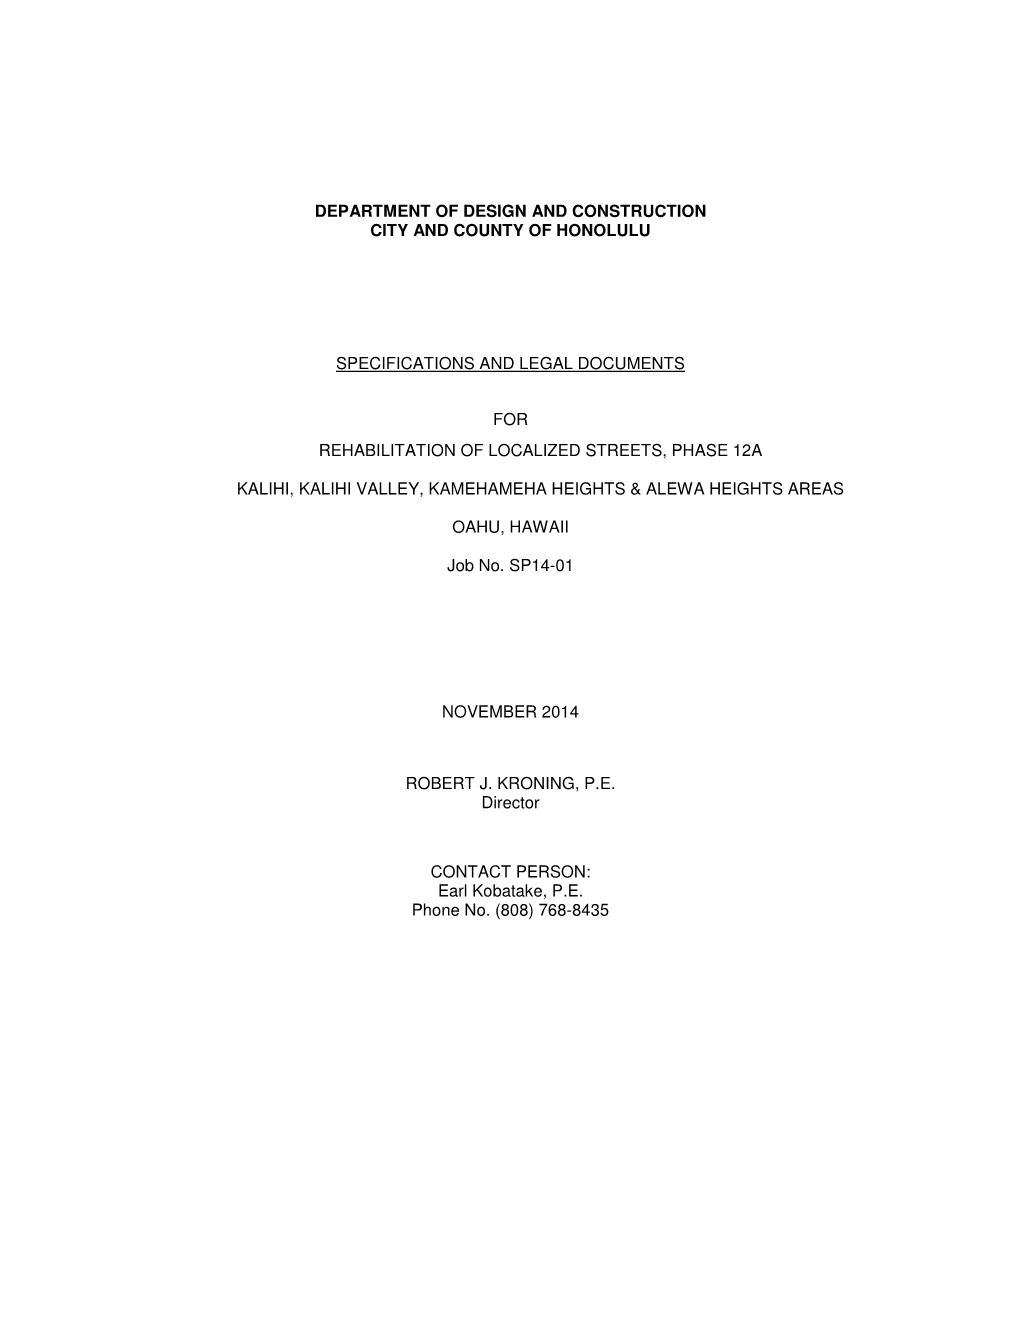 Department of Design and Construction City and County of Honolulu Specifications and Legal Documents for Rehabilitation of Local